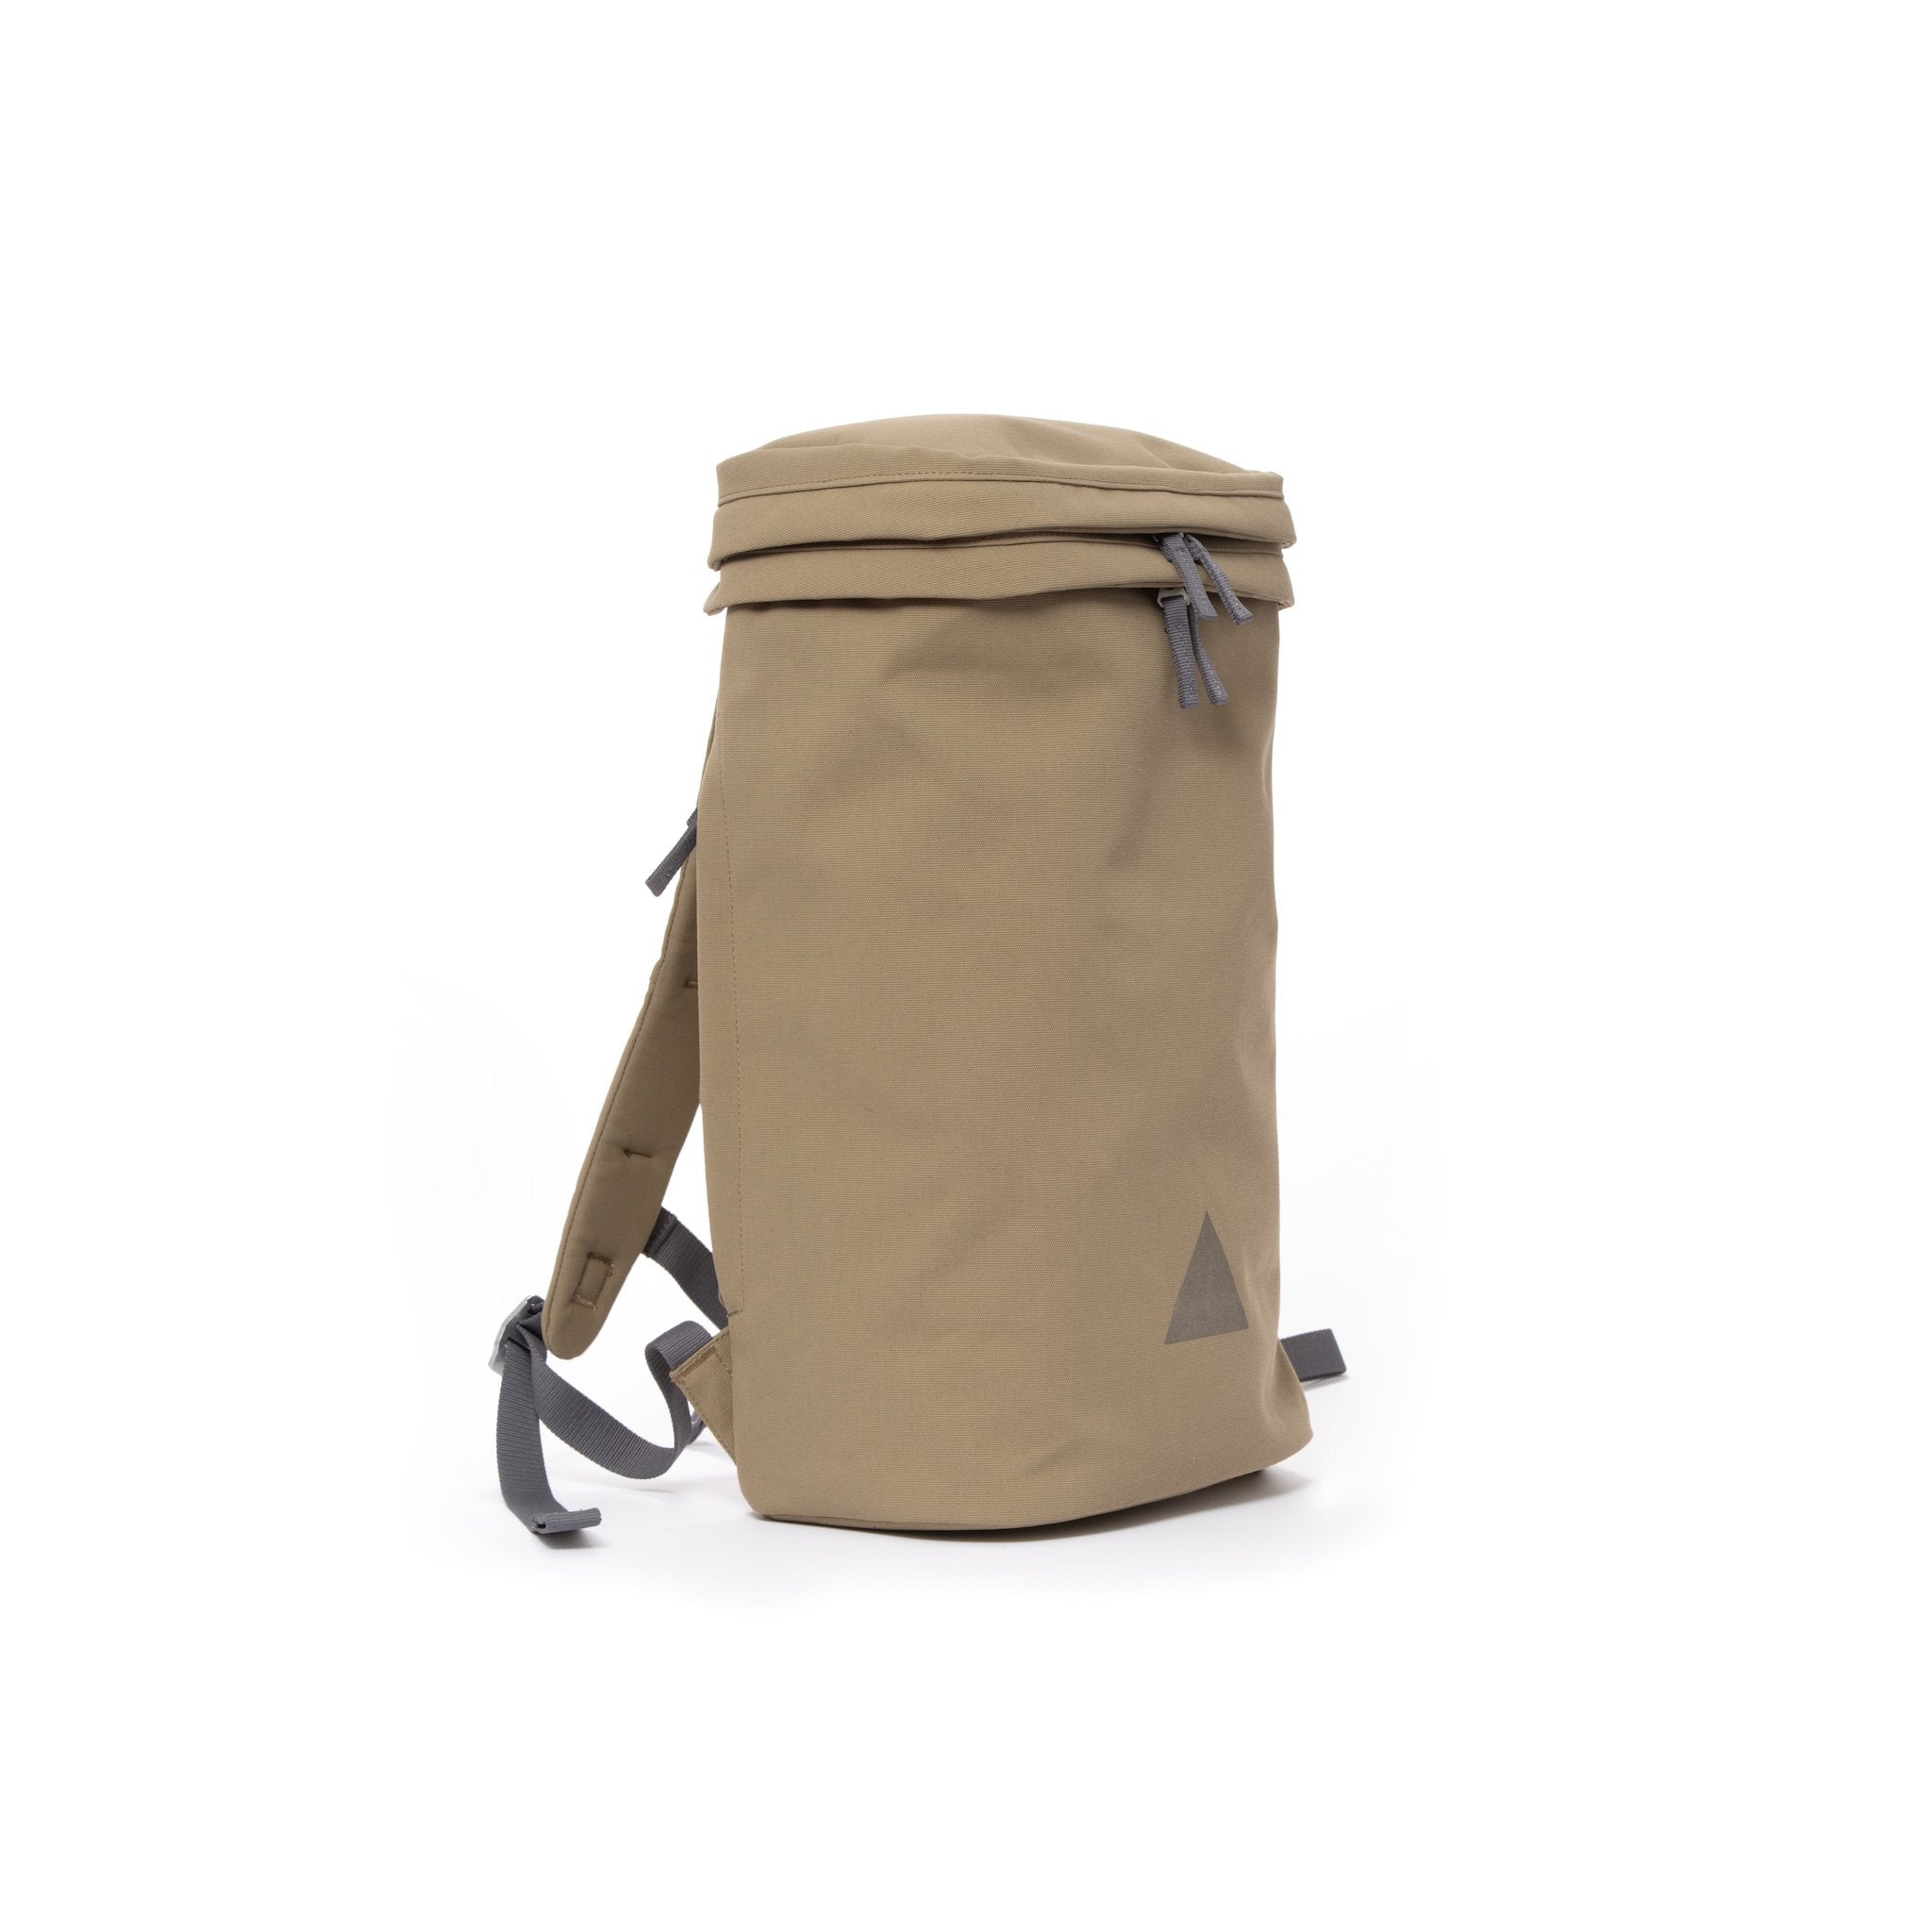 Khaki canvas backpack with padded shoulder straps and triangle logo.